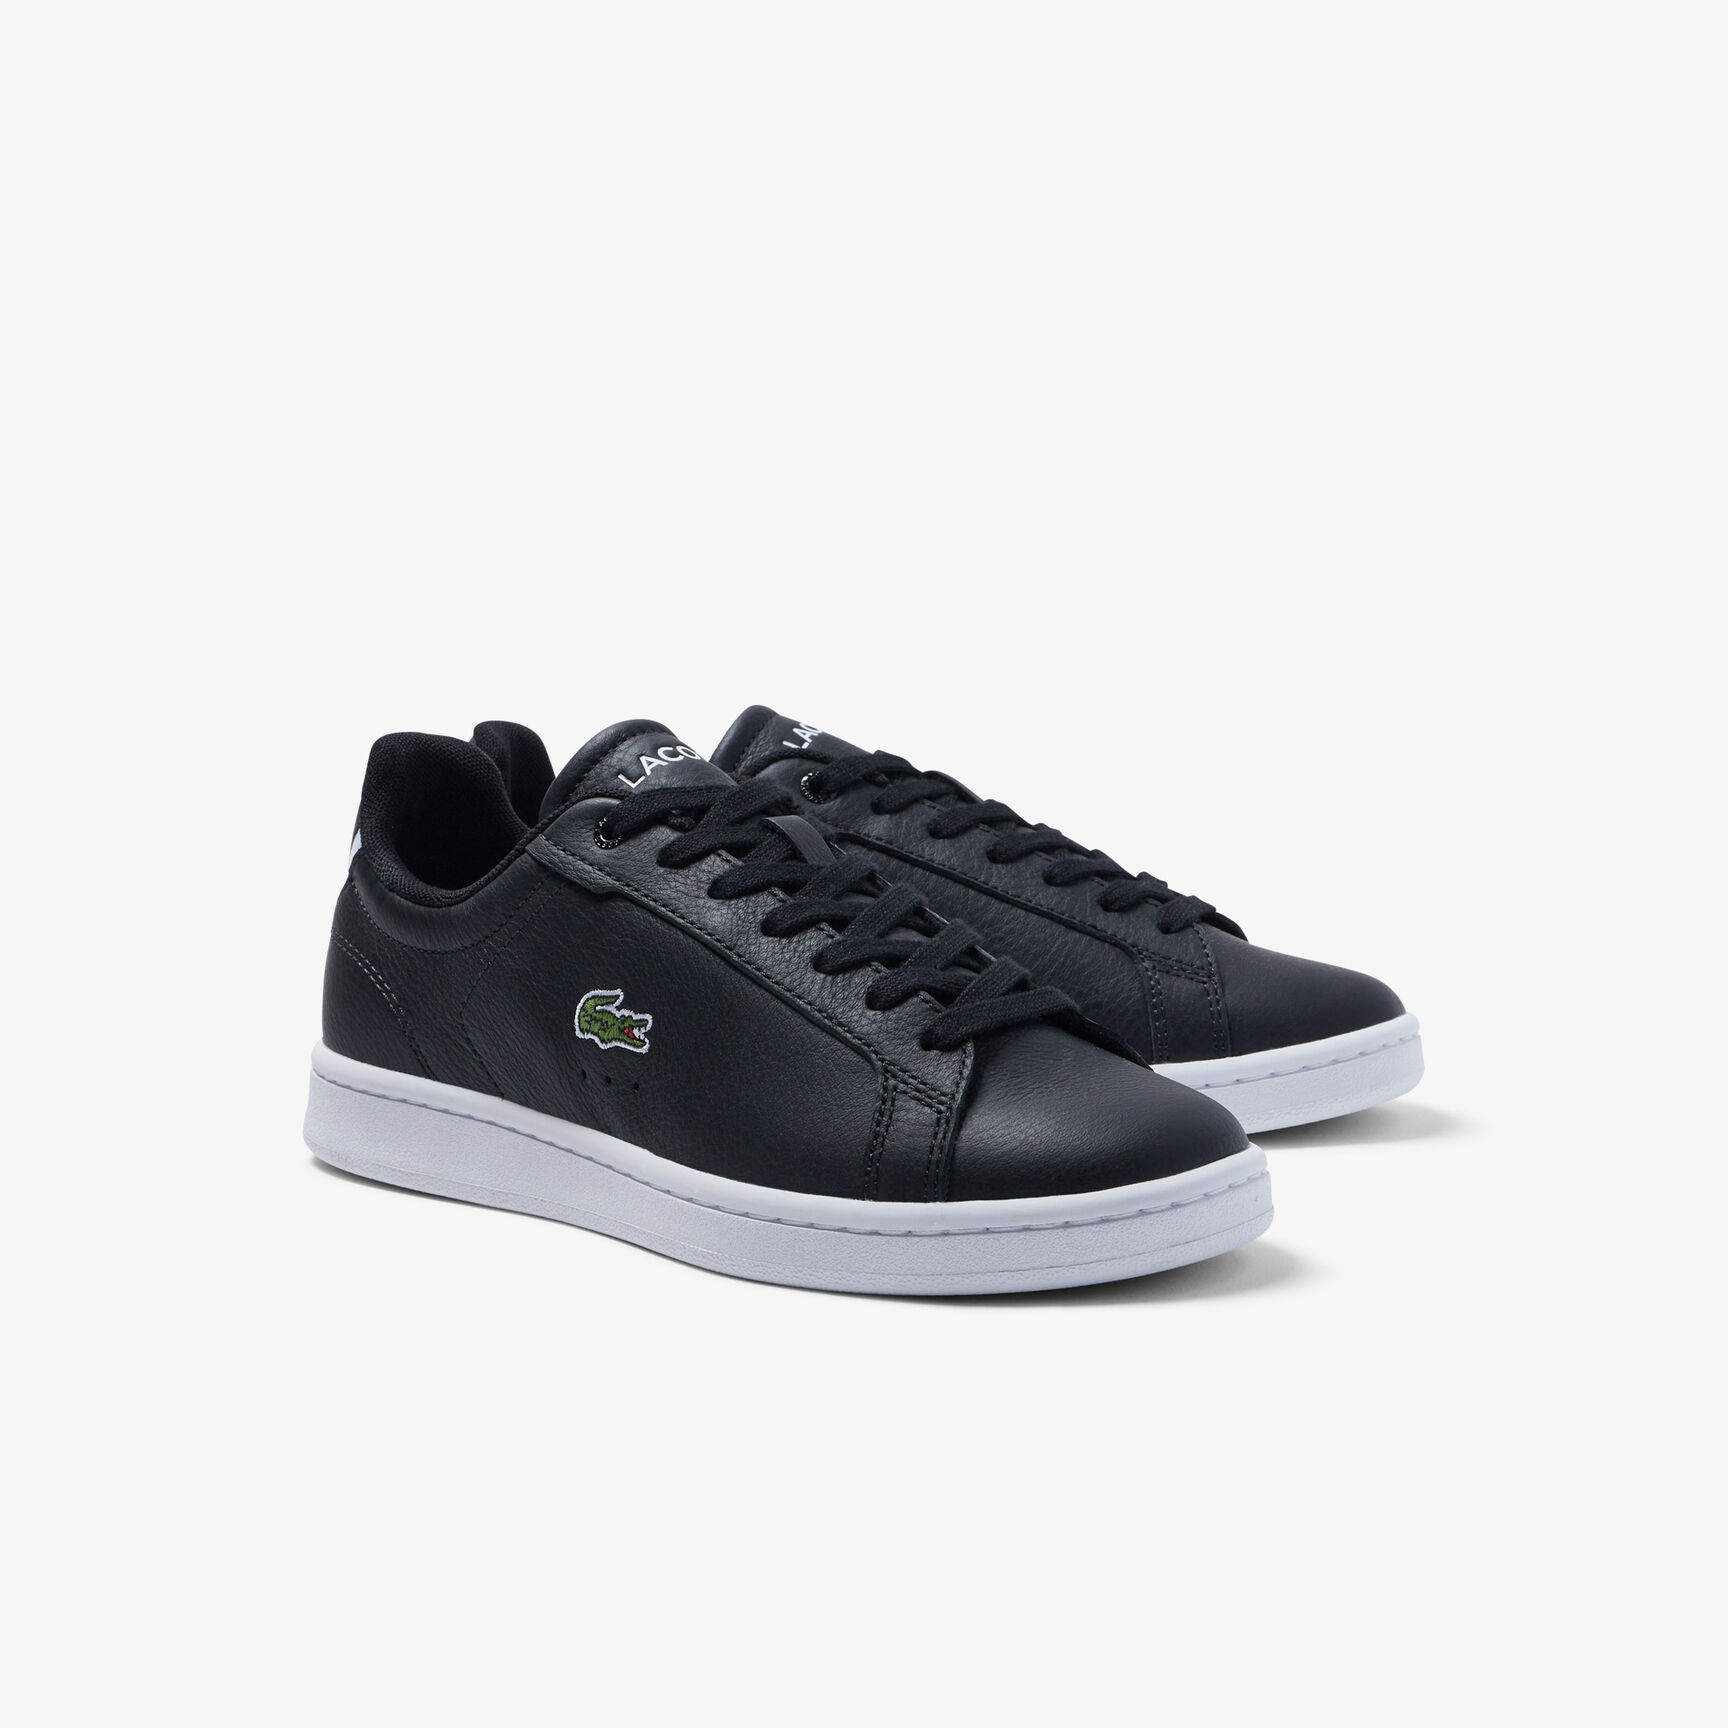 Buy Women's Lacoste Carnaby Pro Leather Trainers | Lacoste UAE